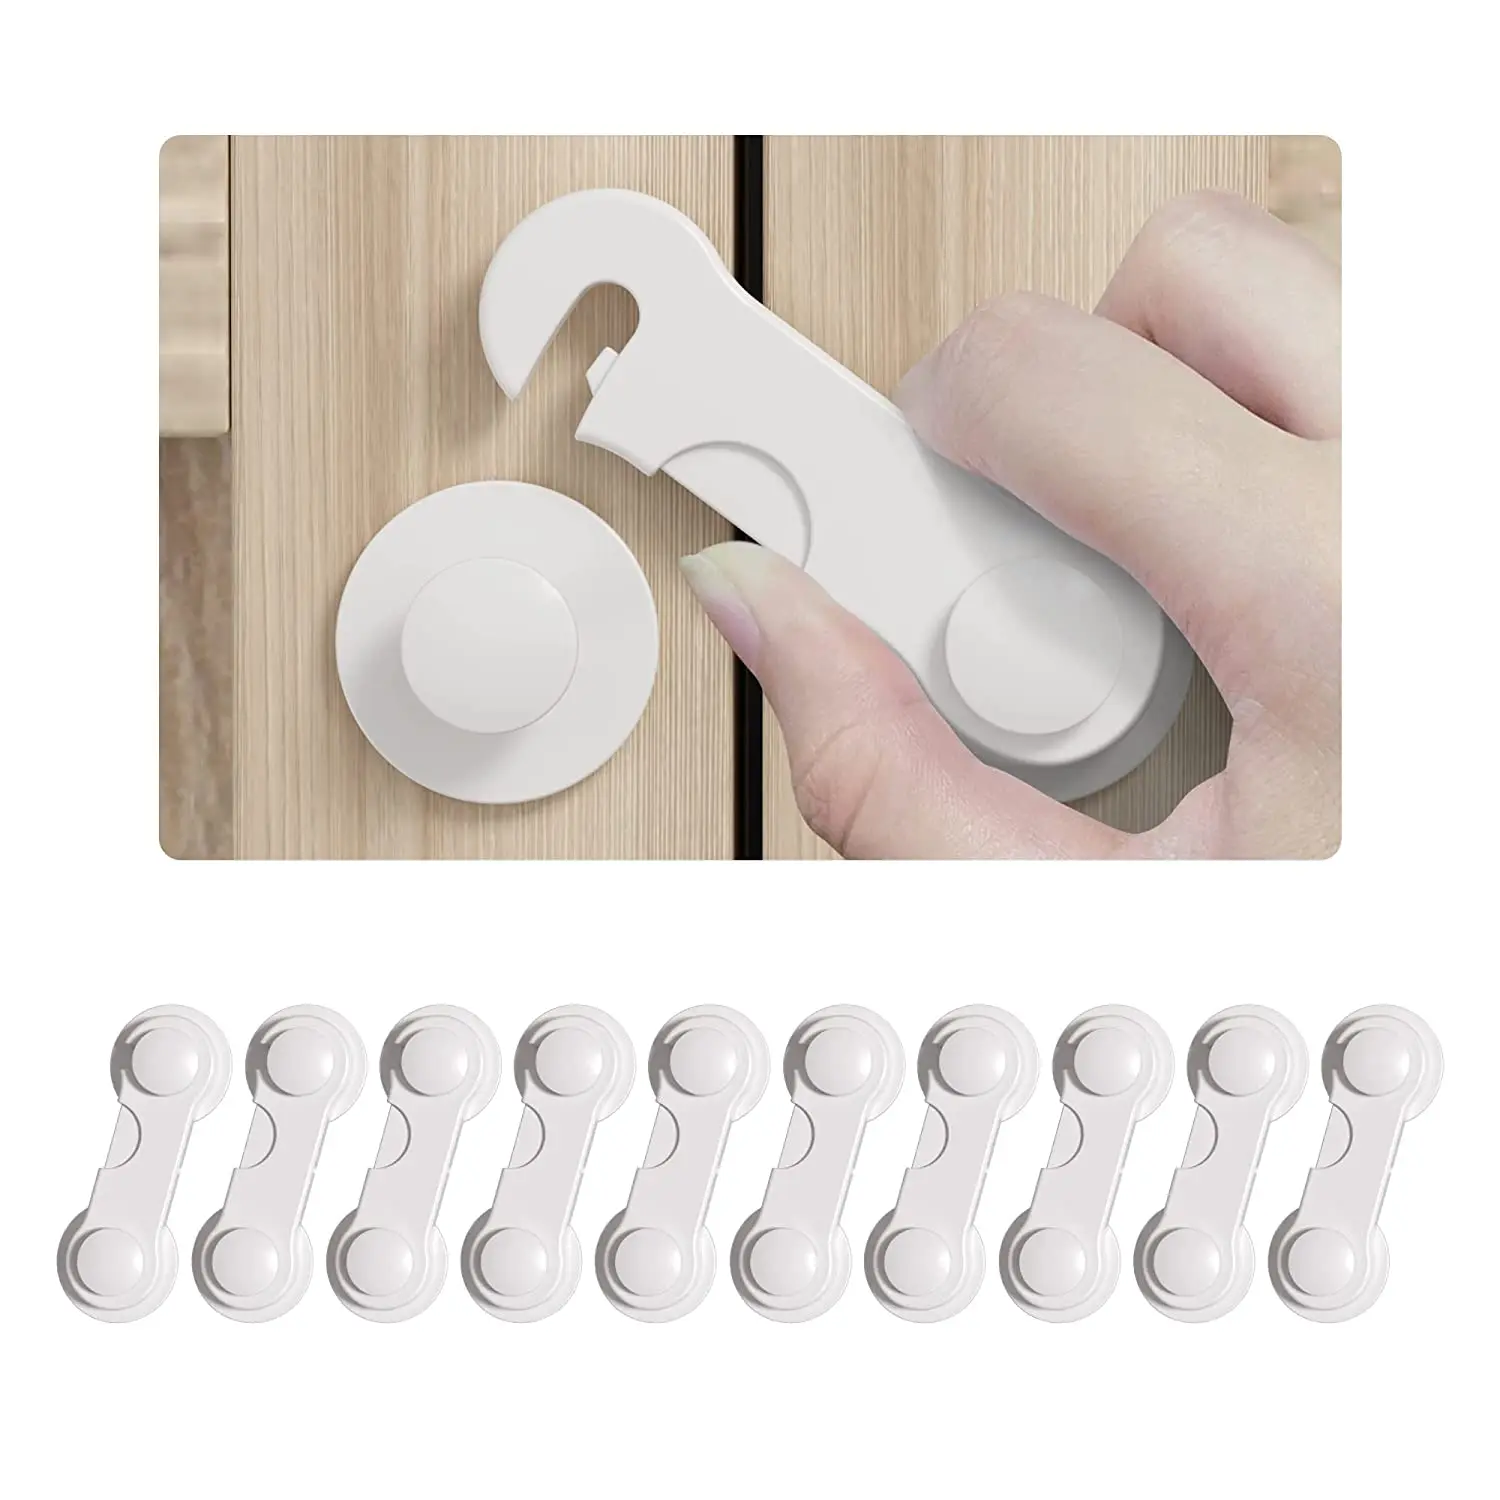 

Baby Locks for Cabinets and Drawers-Child Safety Locks 10 Pack-Baby Proofing Adhesive Latches for Toilet Fridge Oven